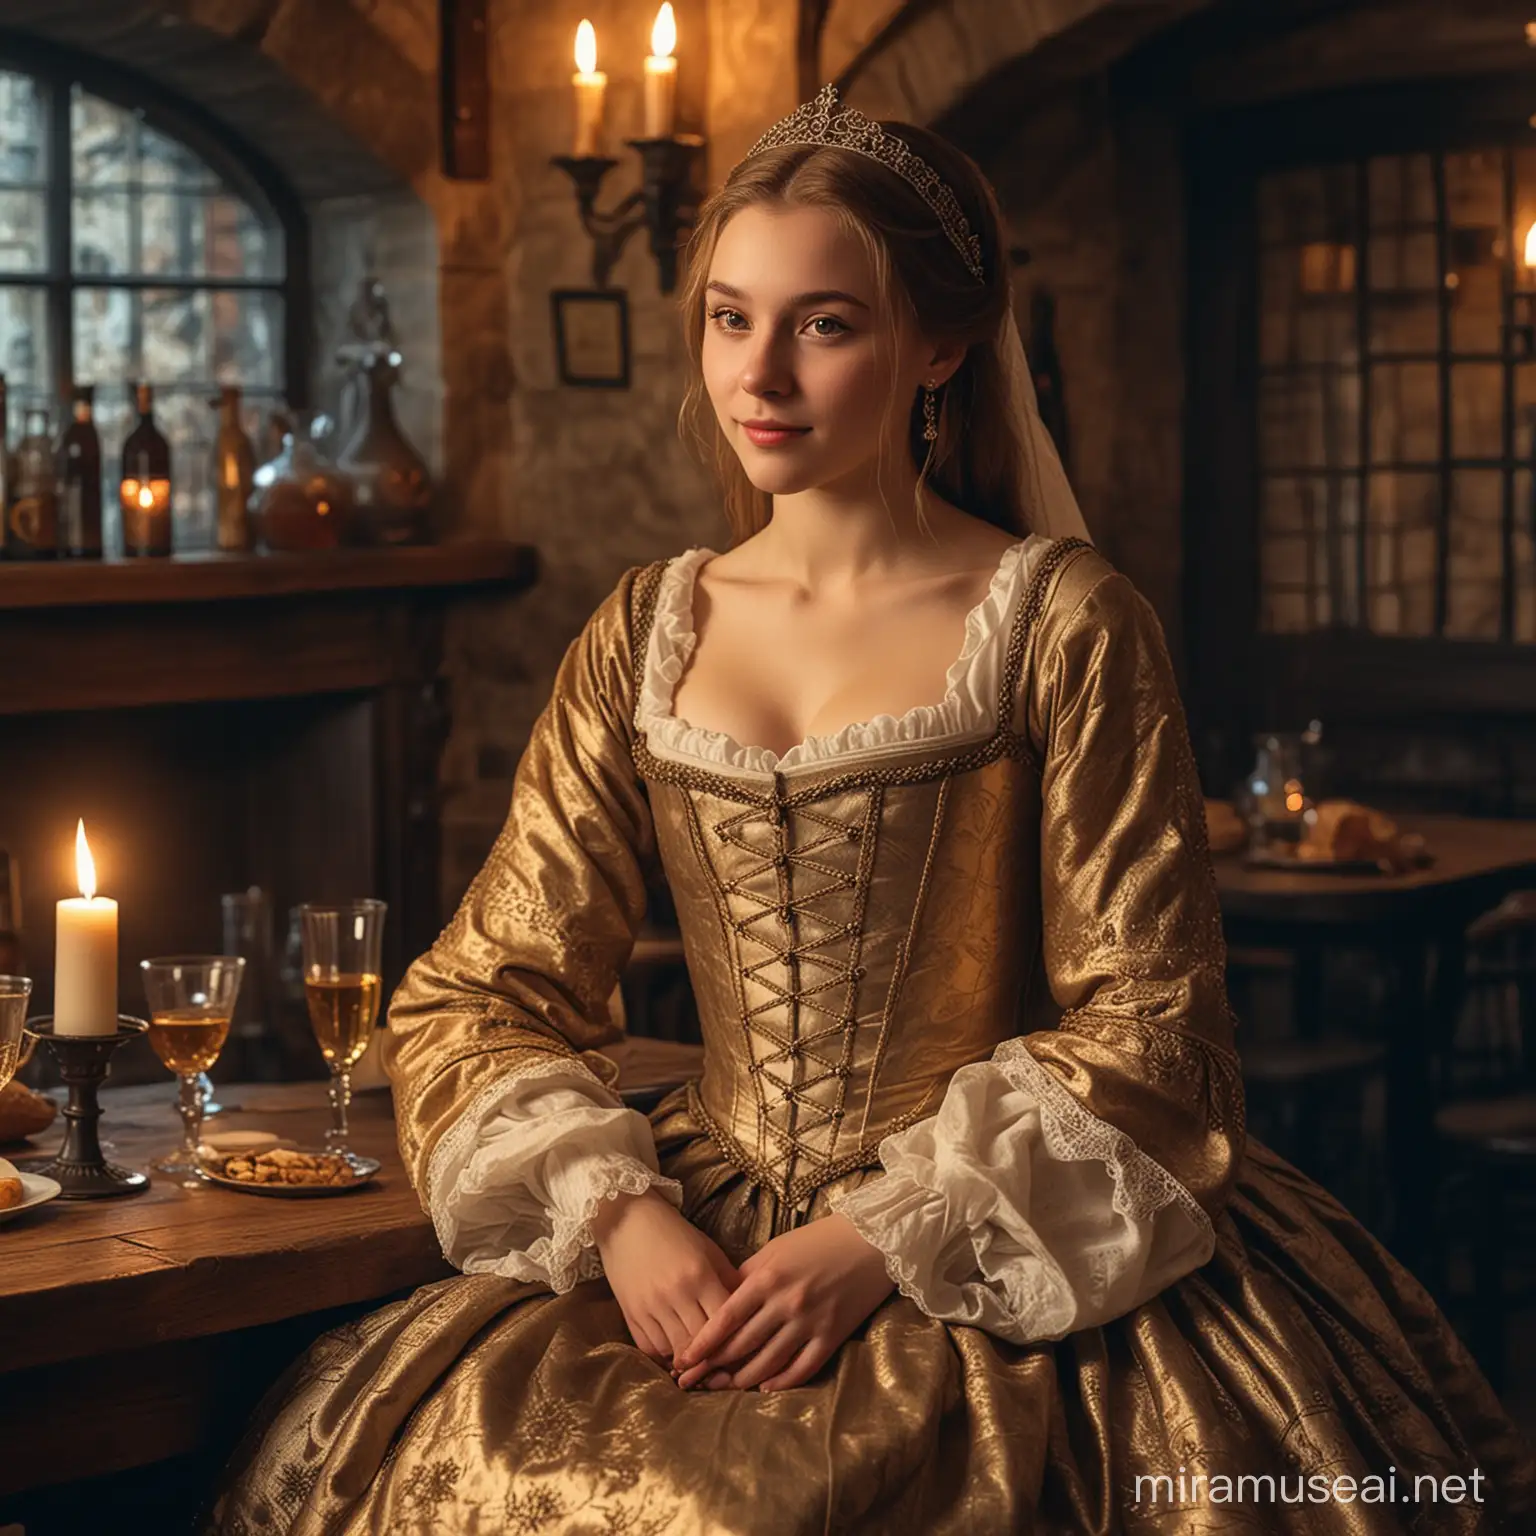 Photo medieval style: a 16 year old female courtesan dressed in the body-hugging medieval renaissance style sits in a noble tavern in the medieval style like England in the Middle Ages. The courtesan smiles enchantingly. The scene takes place in the evening.

